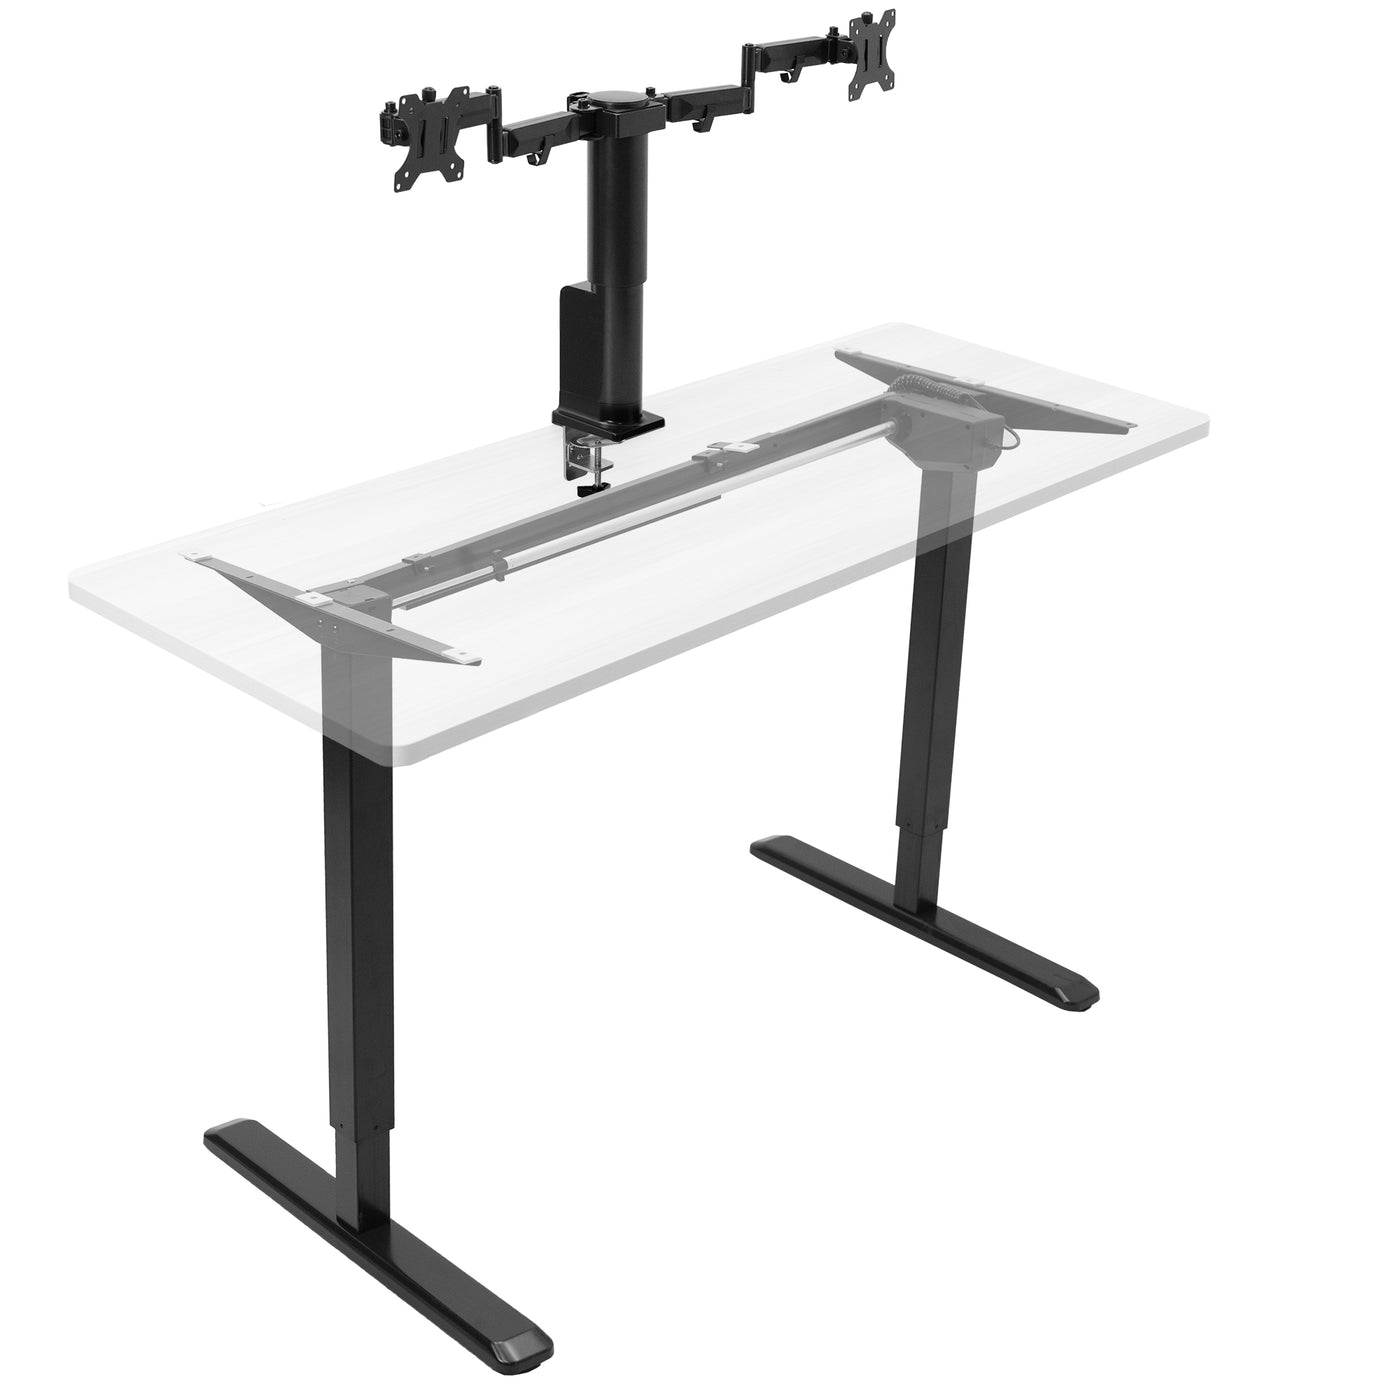 Height adjustable electric desk frame and dual monitor arm.